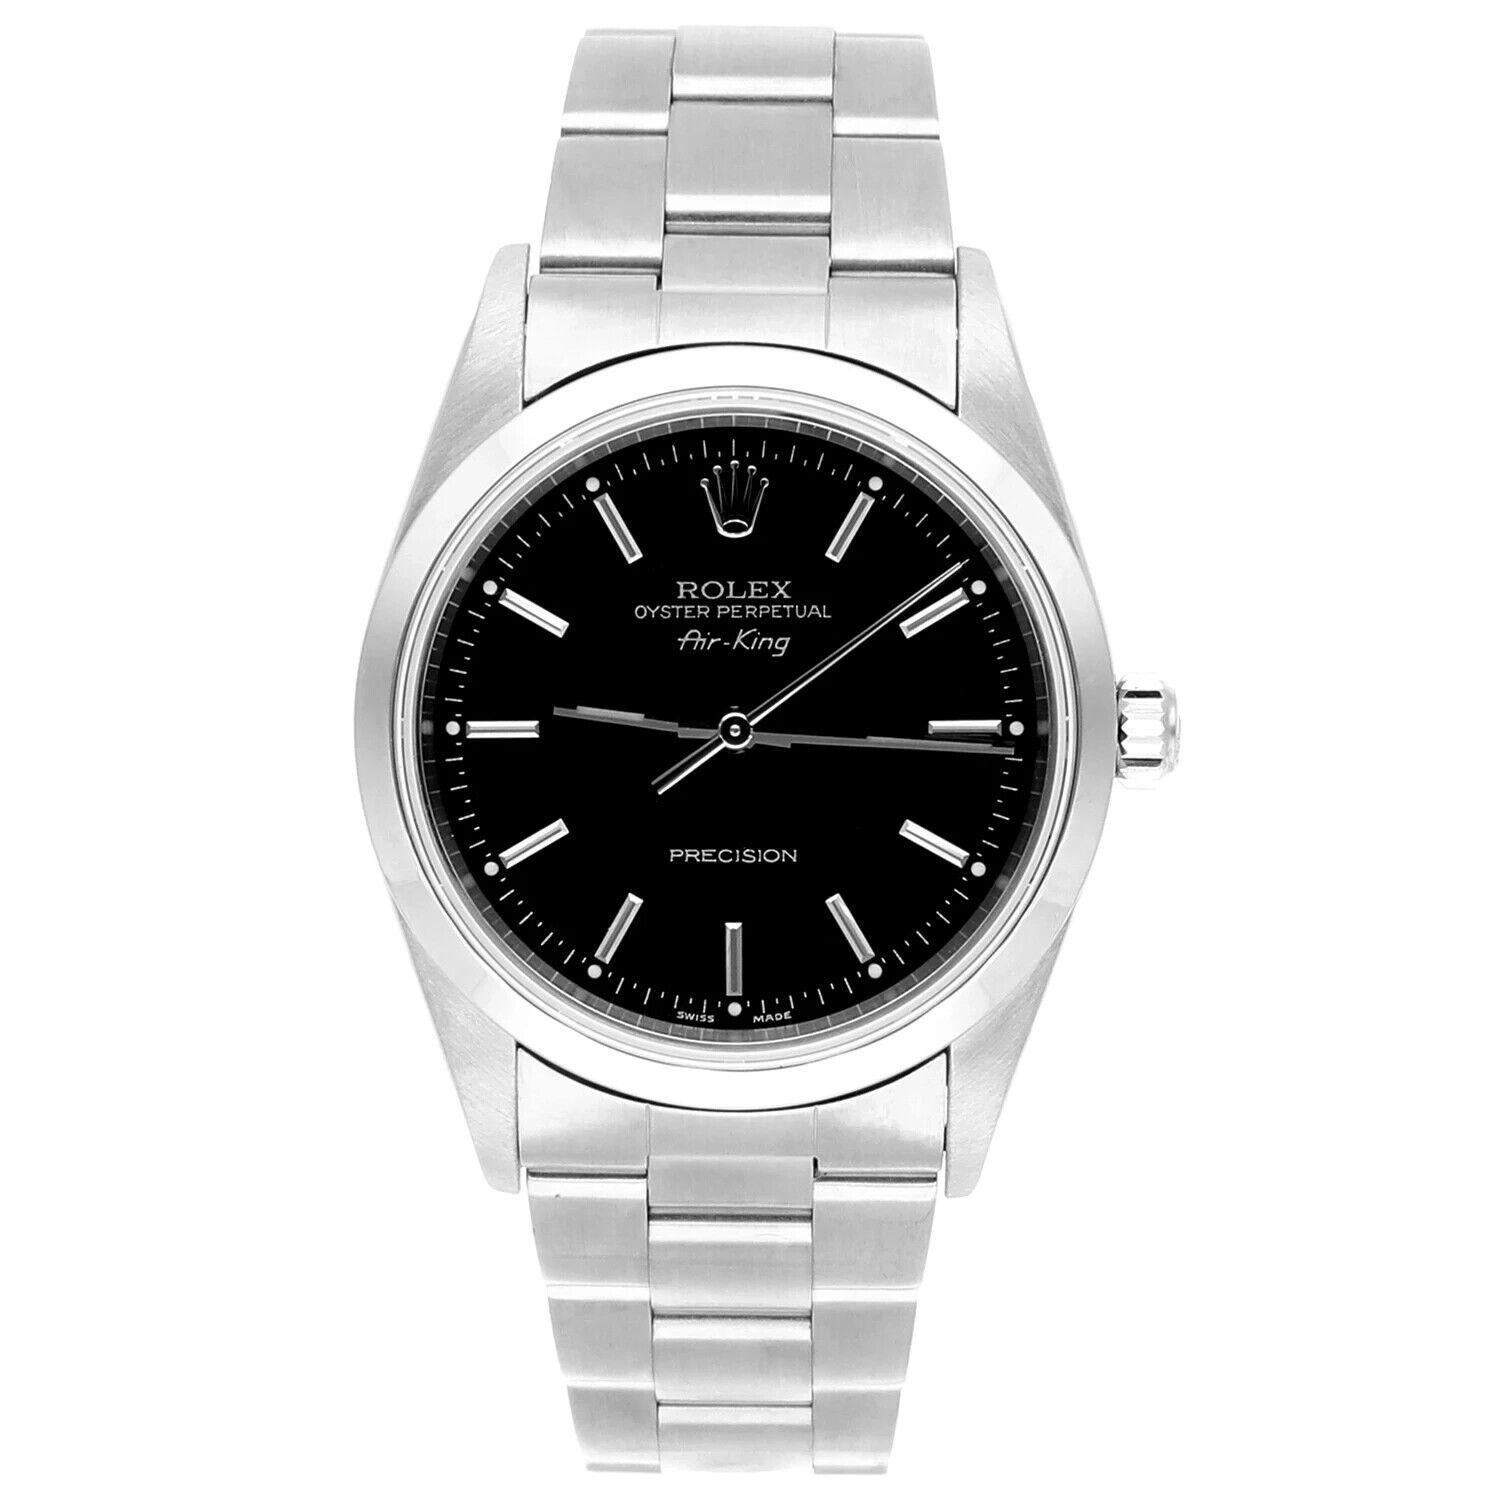 Rolex Air King 34mm Stainless Steel Watch Black Dial Smooth Bezel Unisex Watch 14000, Circa 2000. This watch has been professionally polished, serviced and is in excellent overall condition. There are absolutely no visible scratches or blemishes.